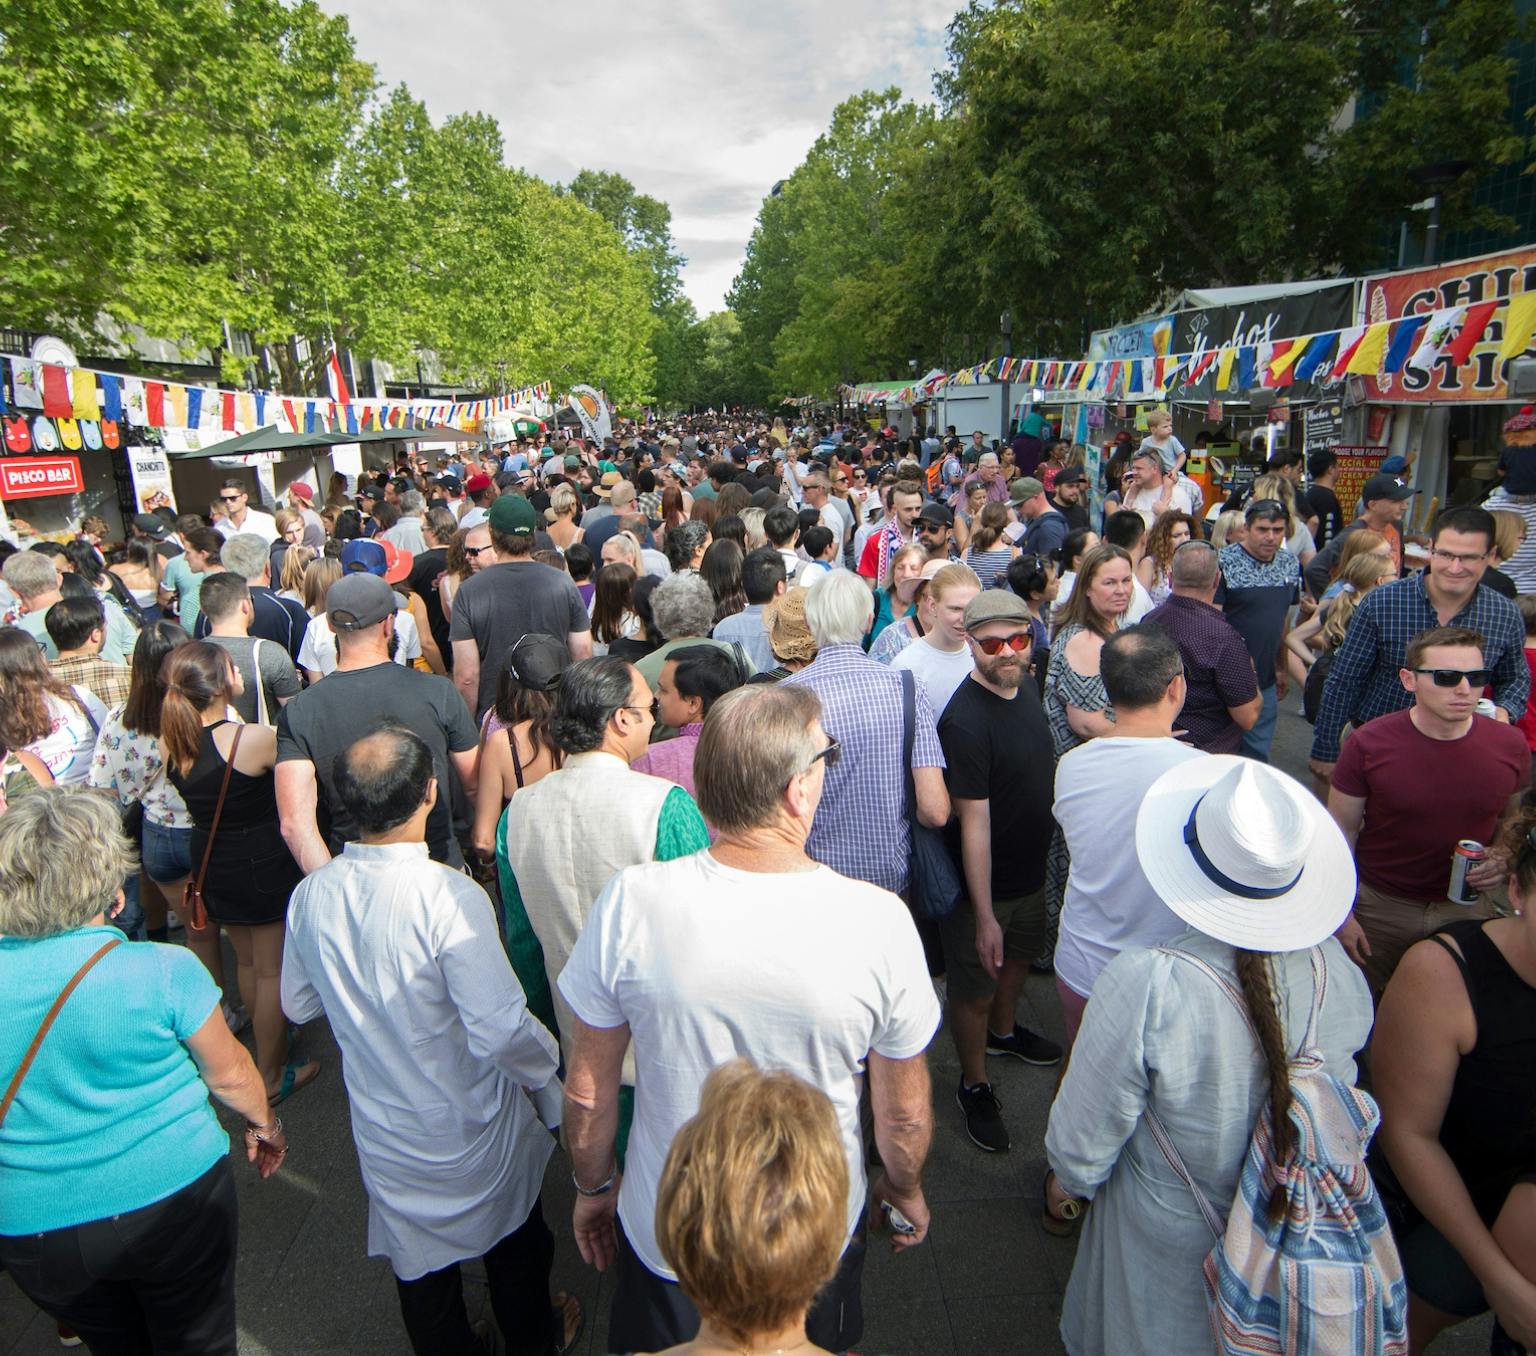 crowd of people in a street lined with food stalls